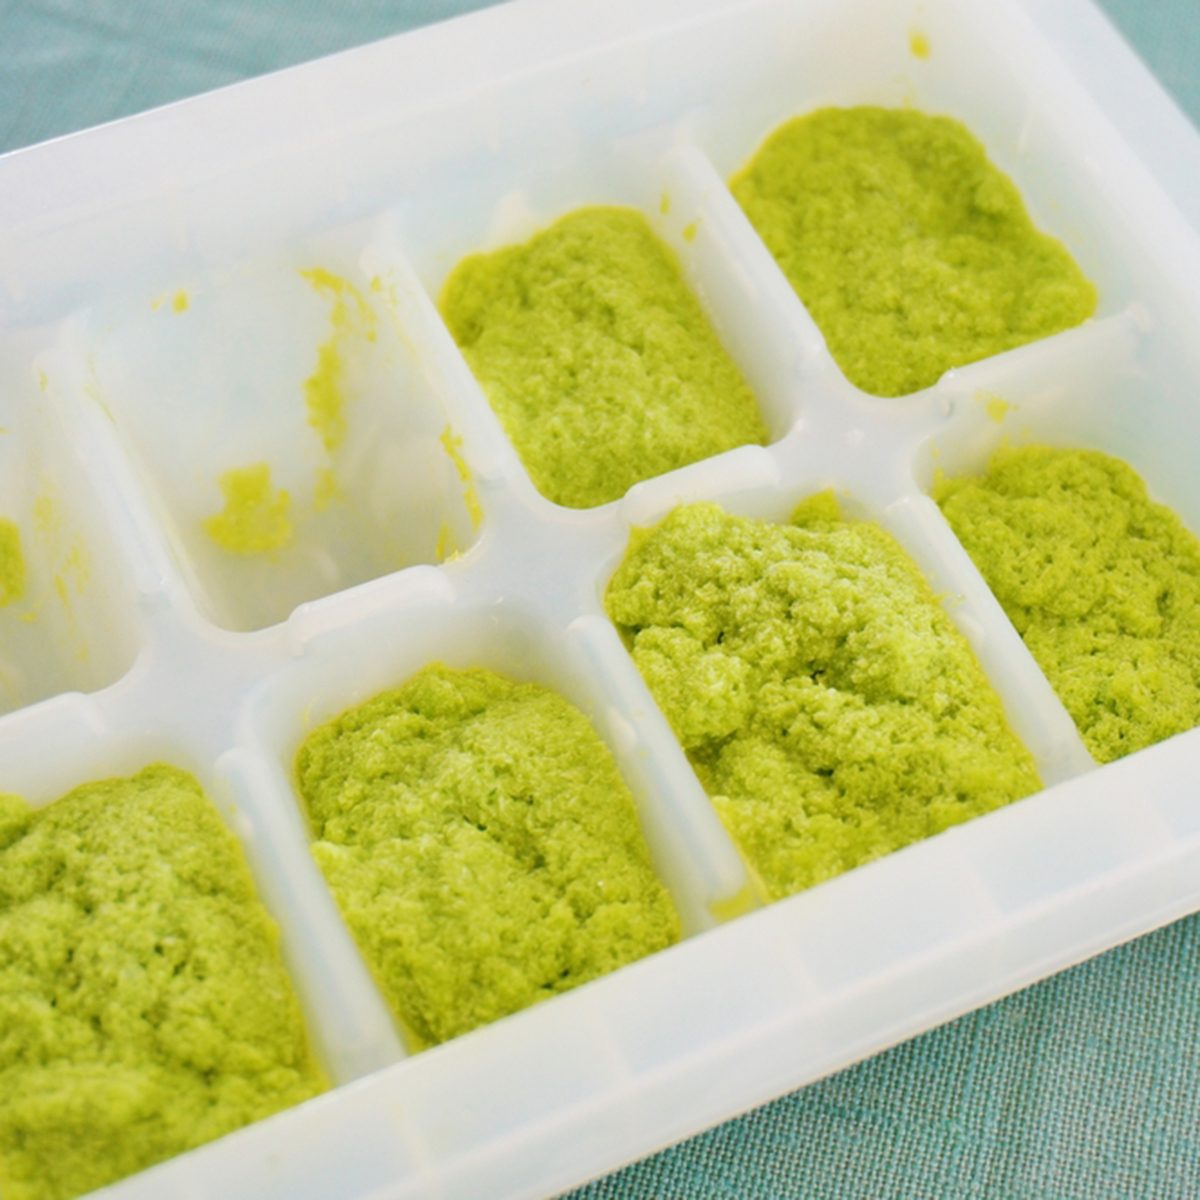 15 Smart Ways to Use an Ice Cube Tray for Meal Prepping and More